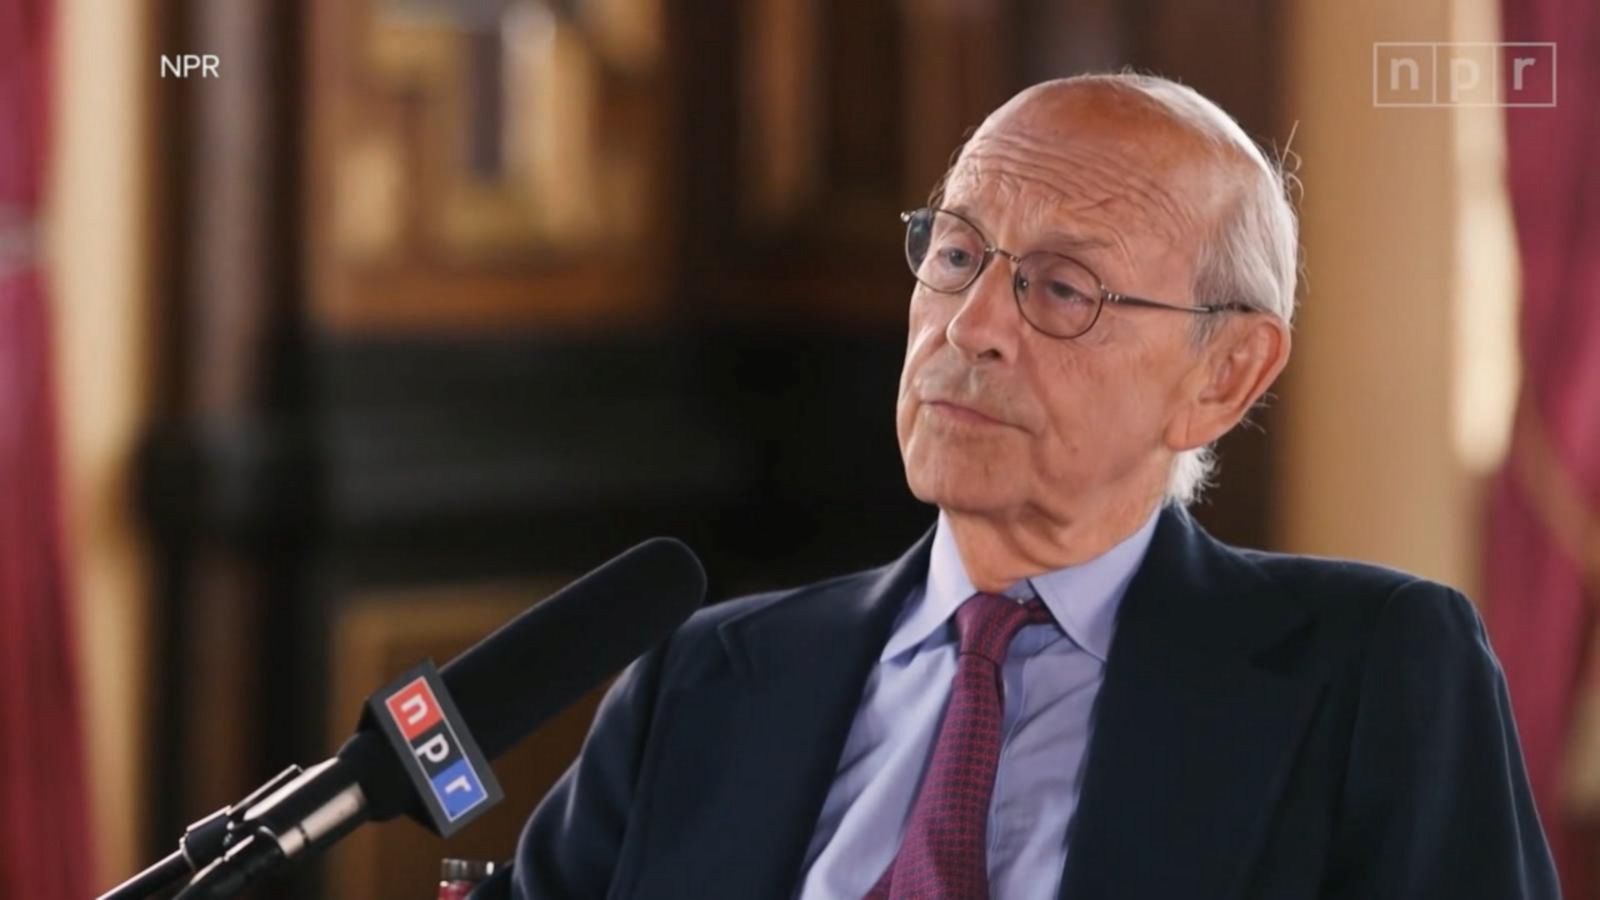 Supreme Court Justice Breyer criticizes the court Good Morning America